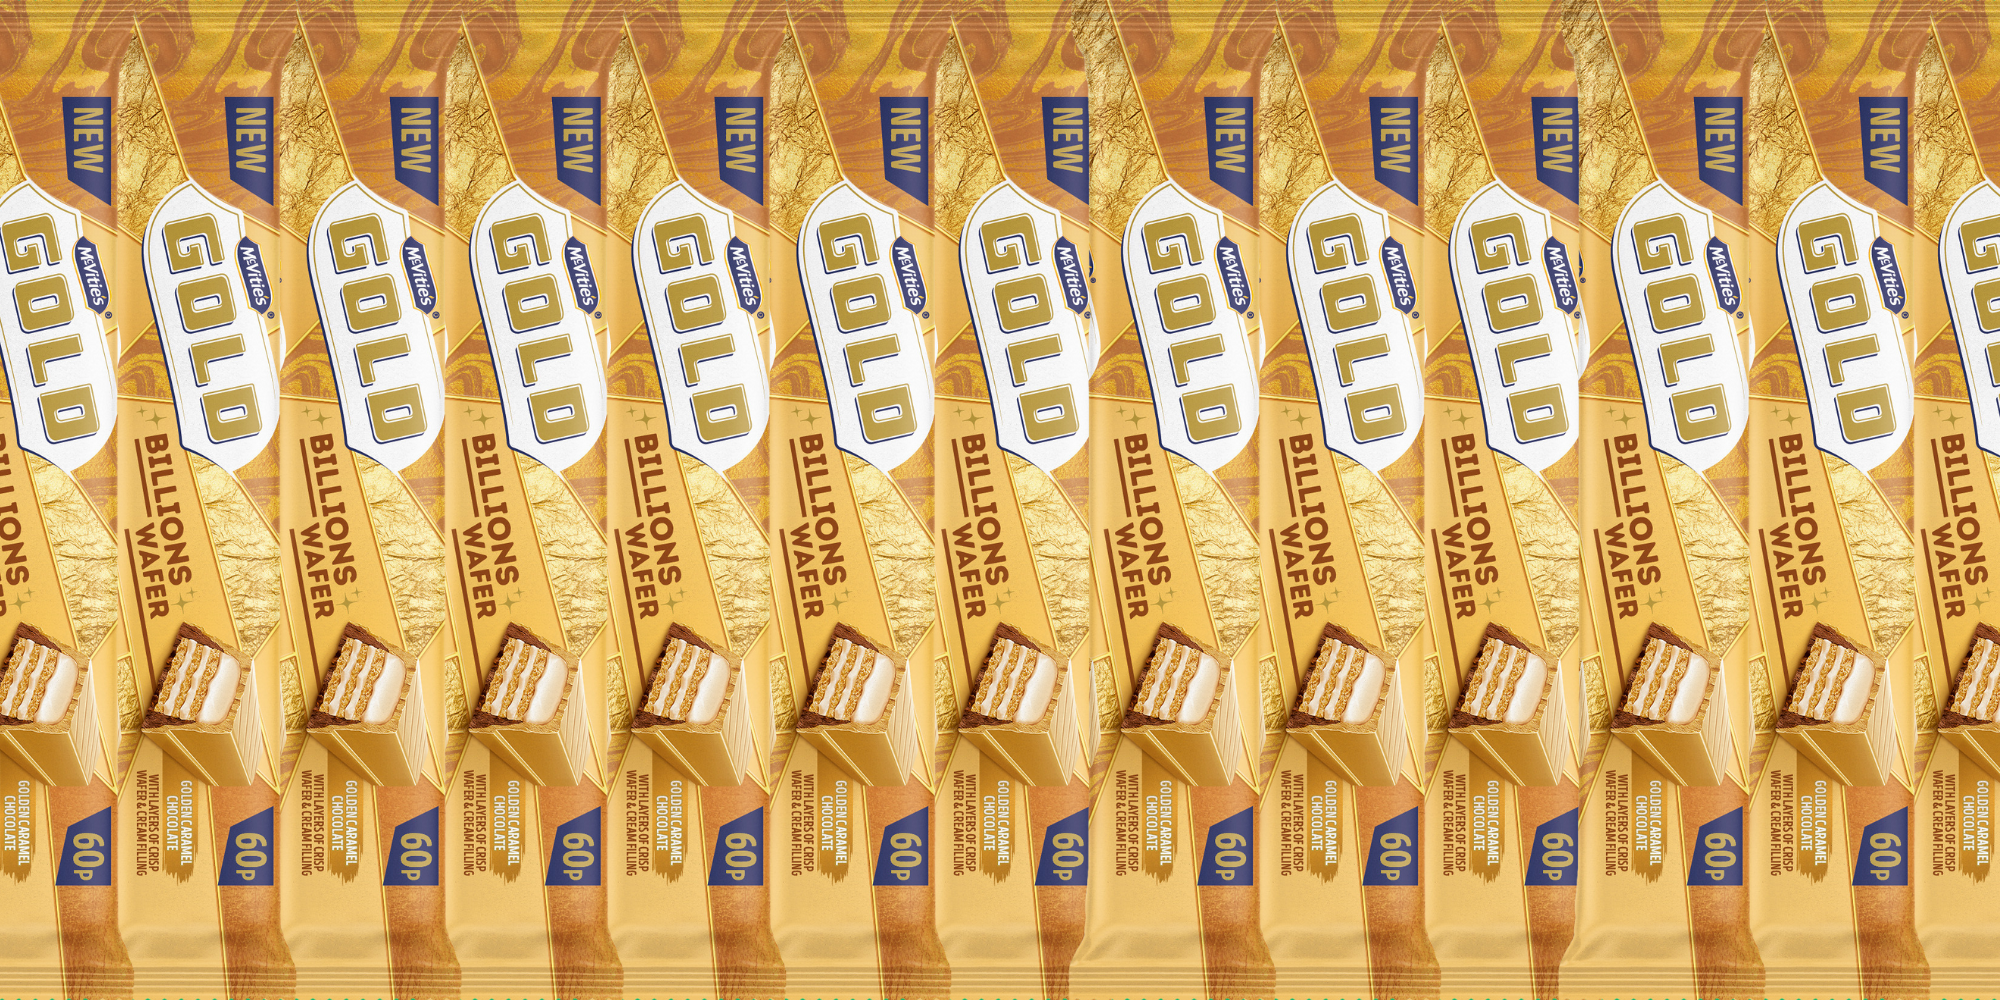 Solid Gold Ganache Chocolate Bars Unveiled